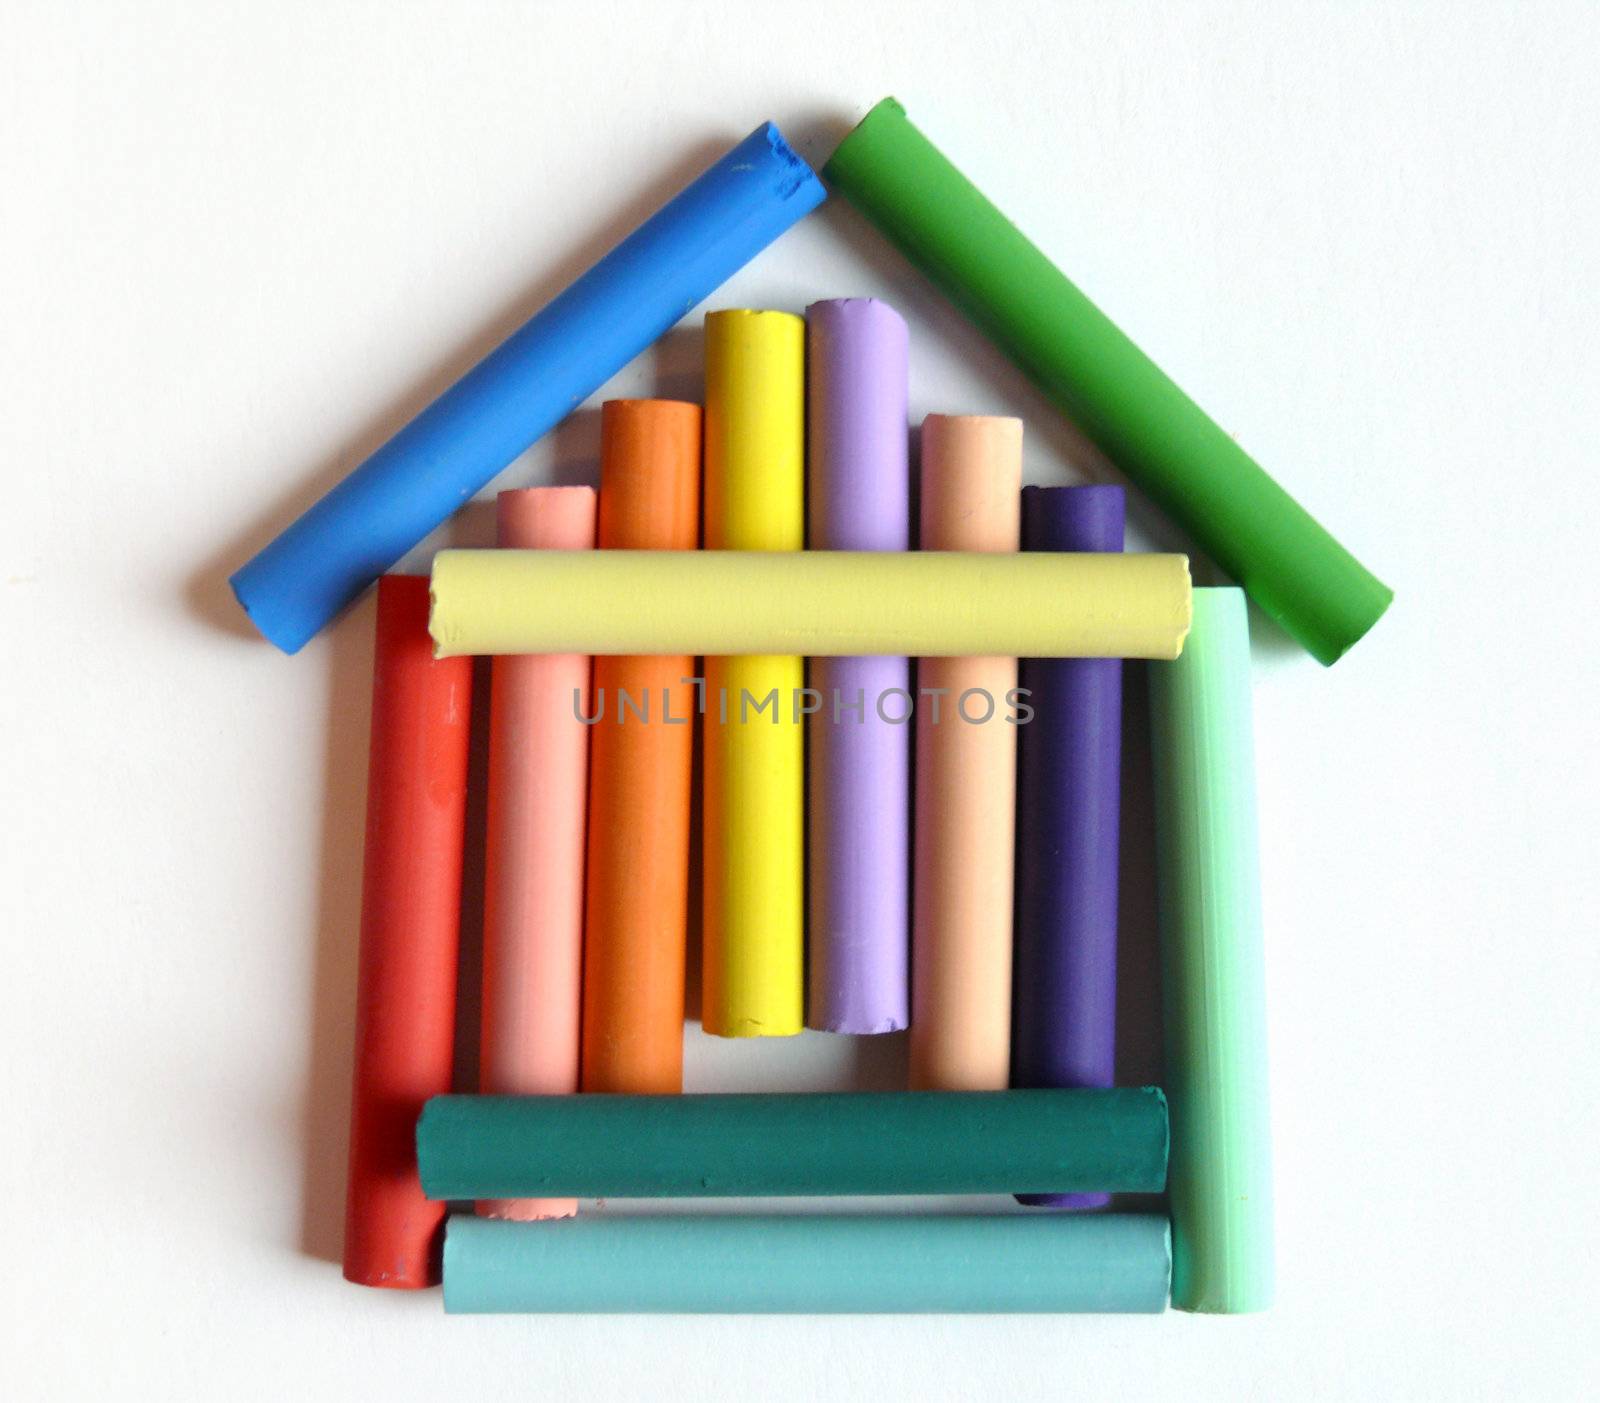 toy house made of color pastels on white paper